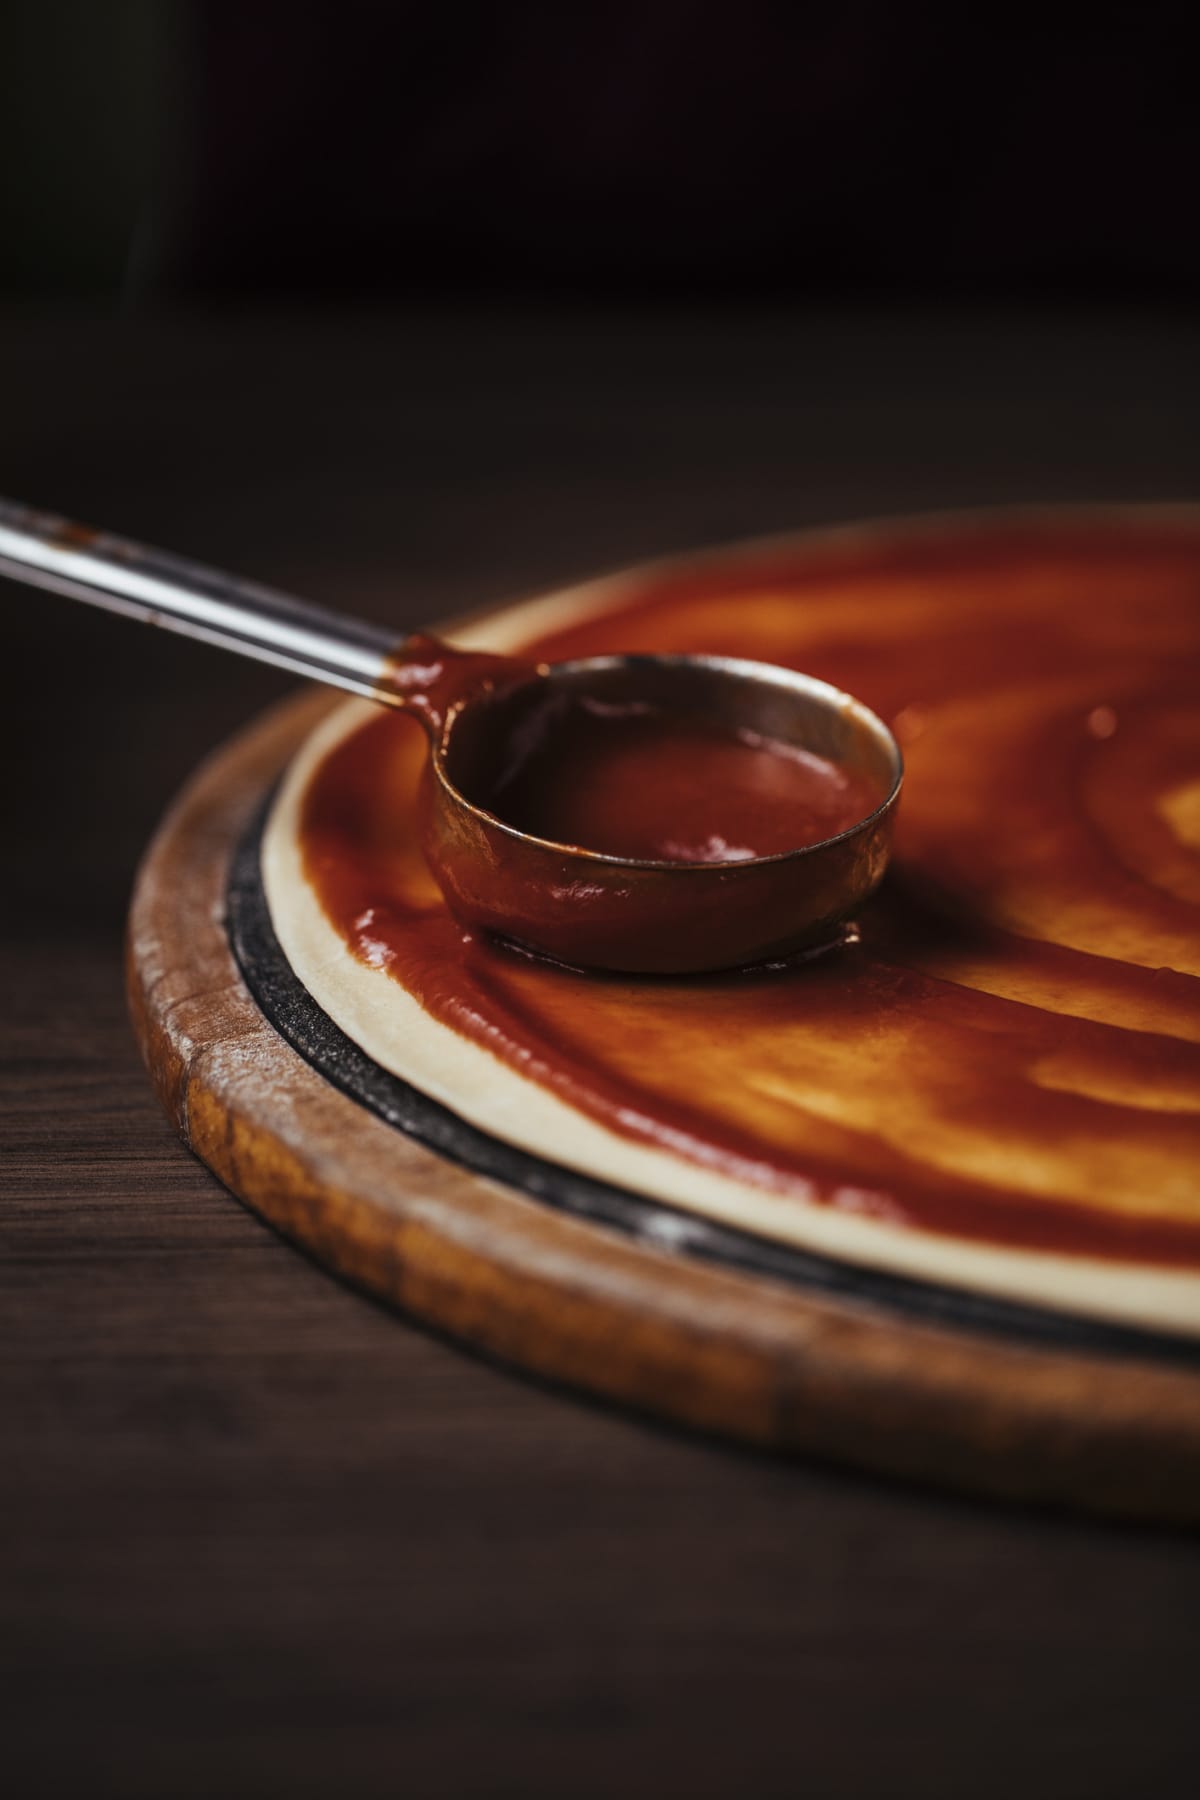 Stock photo showing close-up, elevated view of a rich tomato sauce in a large frying pan being stirred with a wooden spatula as it reduces.  This savoury sauce has had green basil leaf herbs added to it.